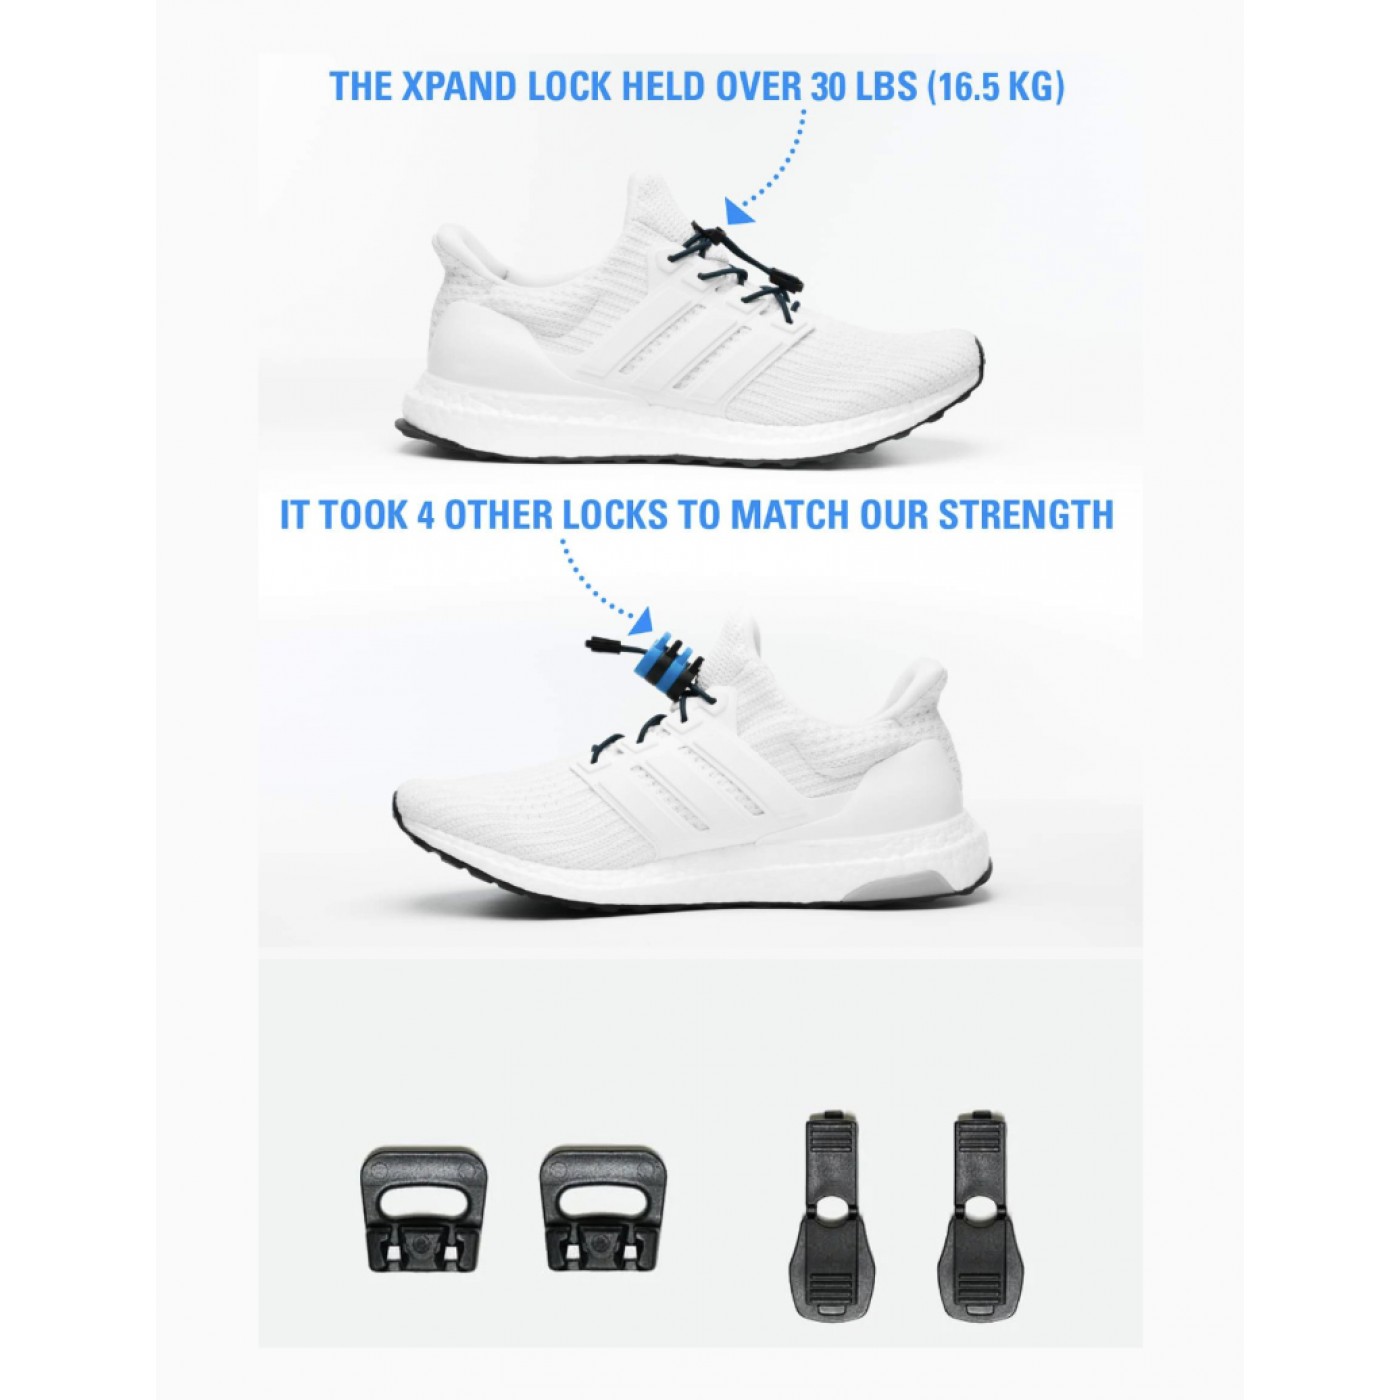 Xpand Quick-Release Round Lacing System White